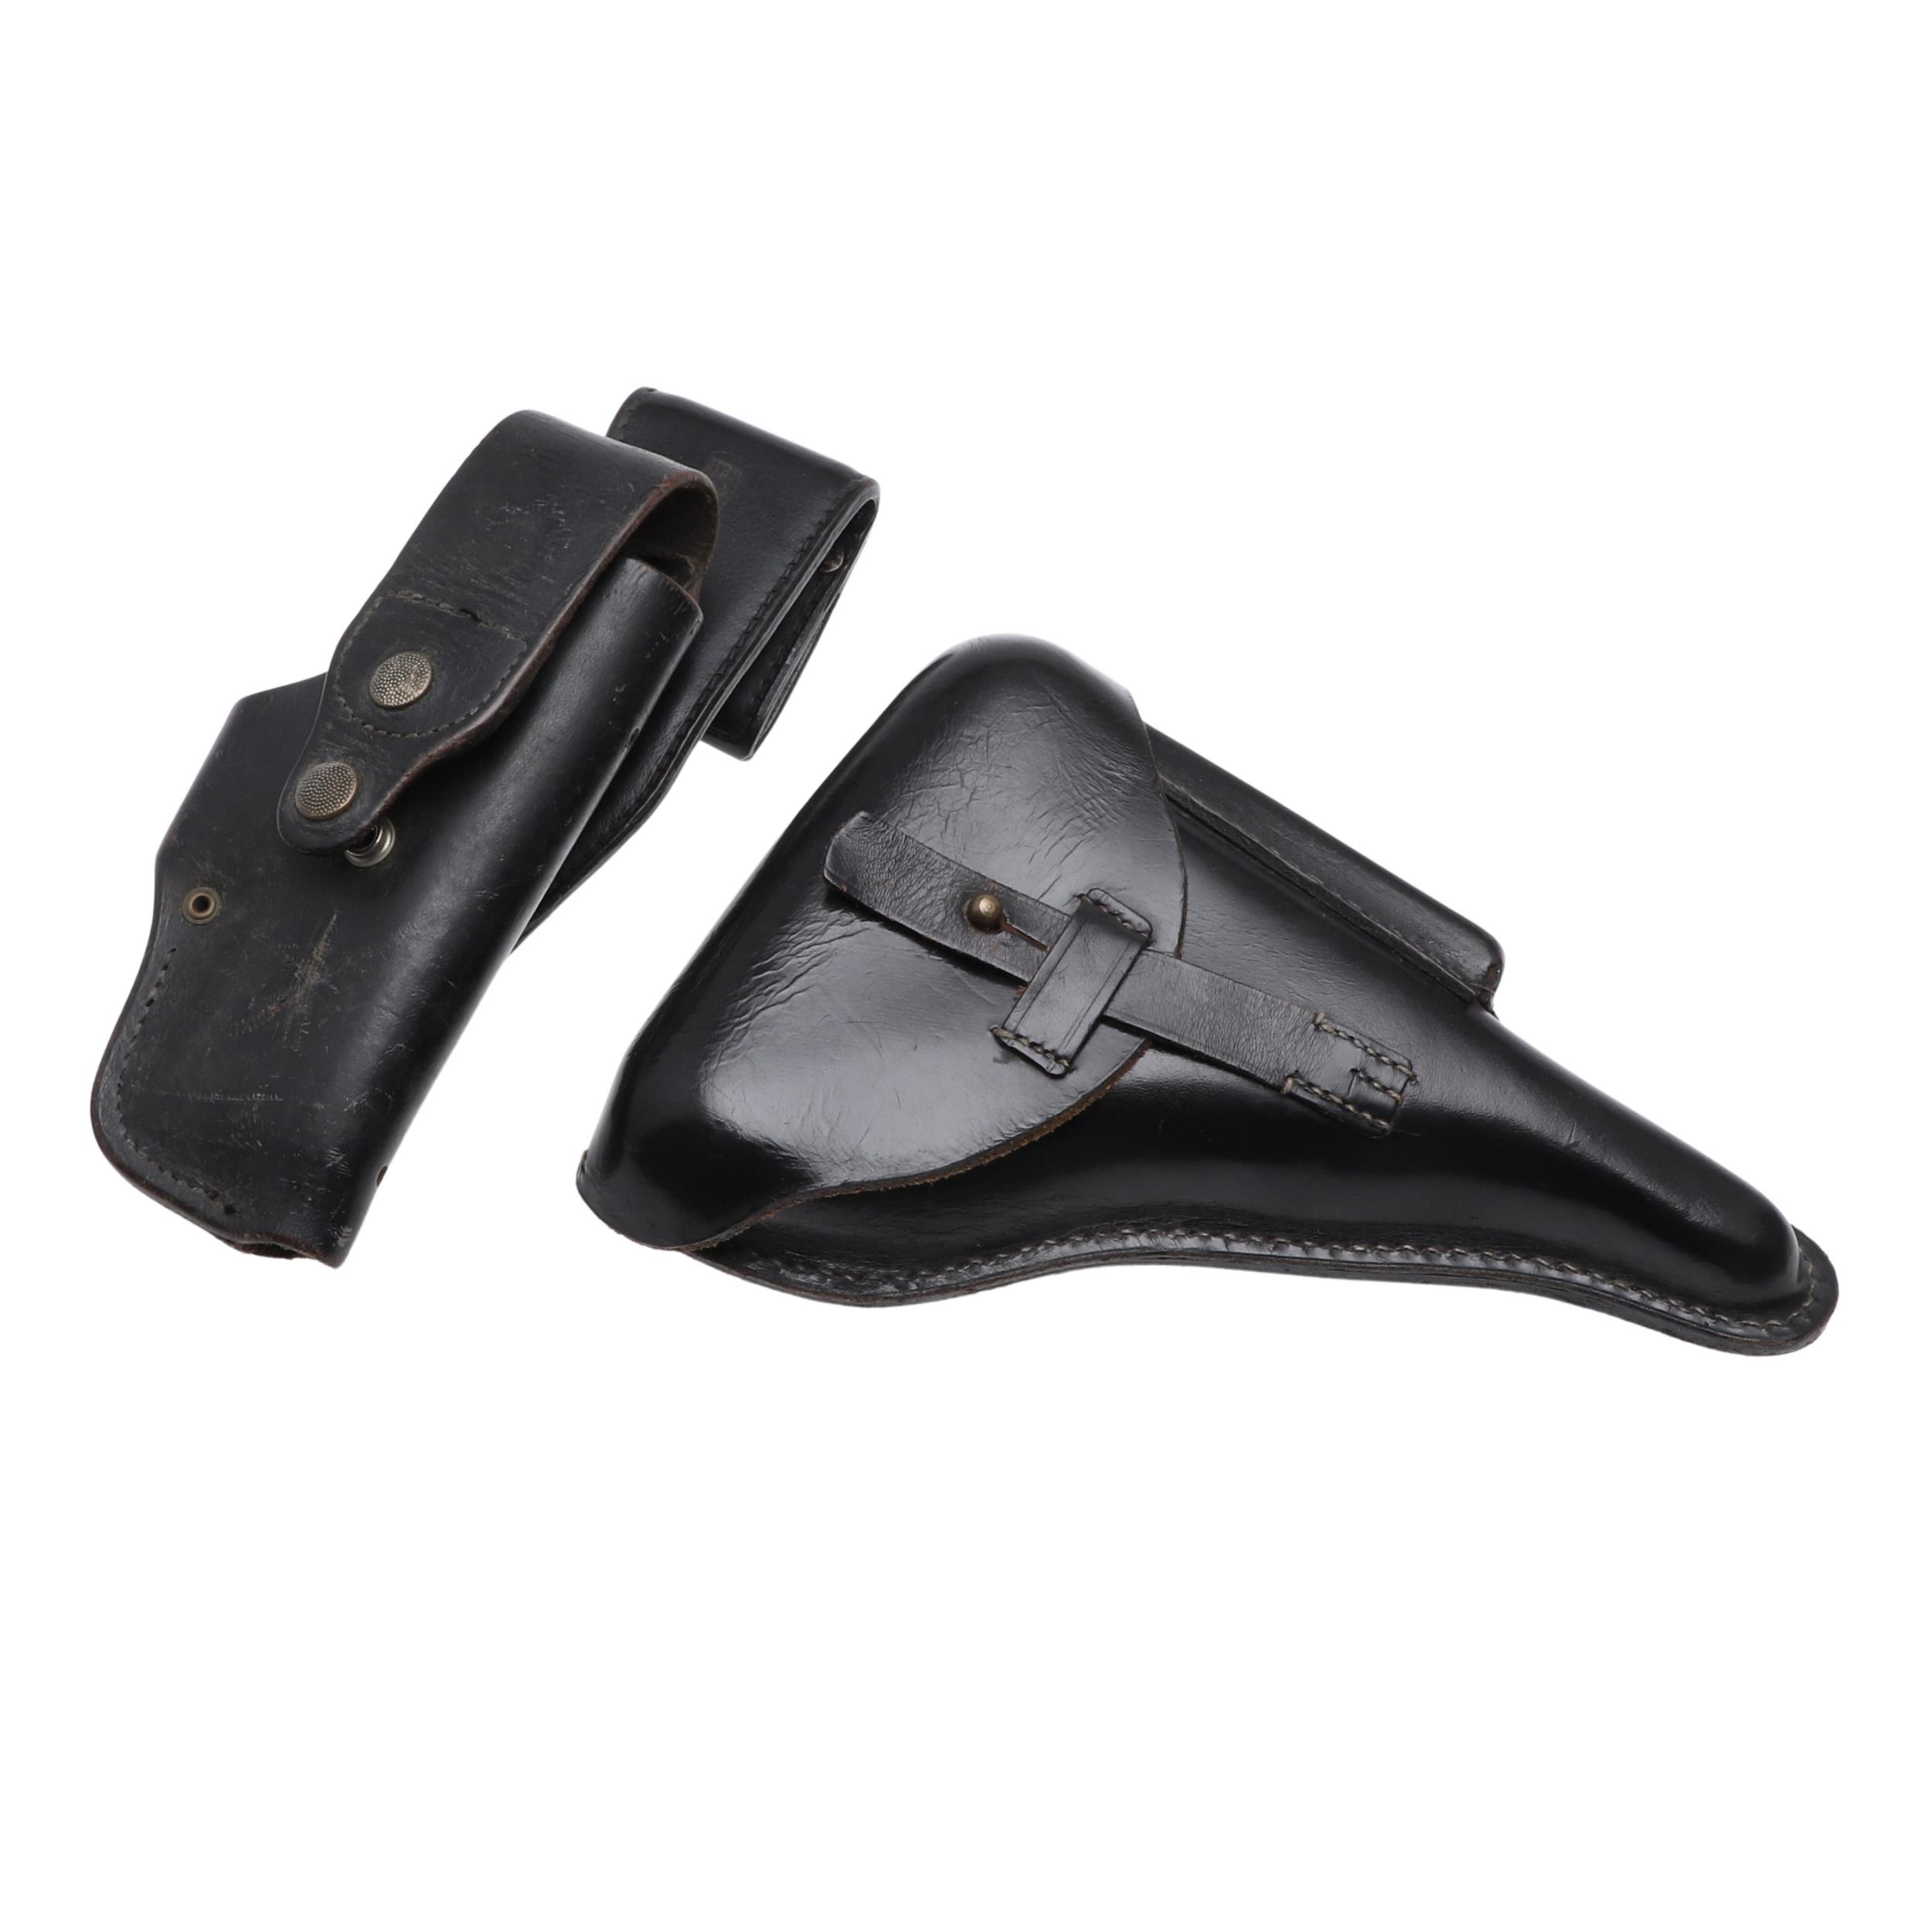 A LUGER HOLSTER AND ANOTHER SIMILAR.